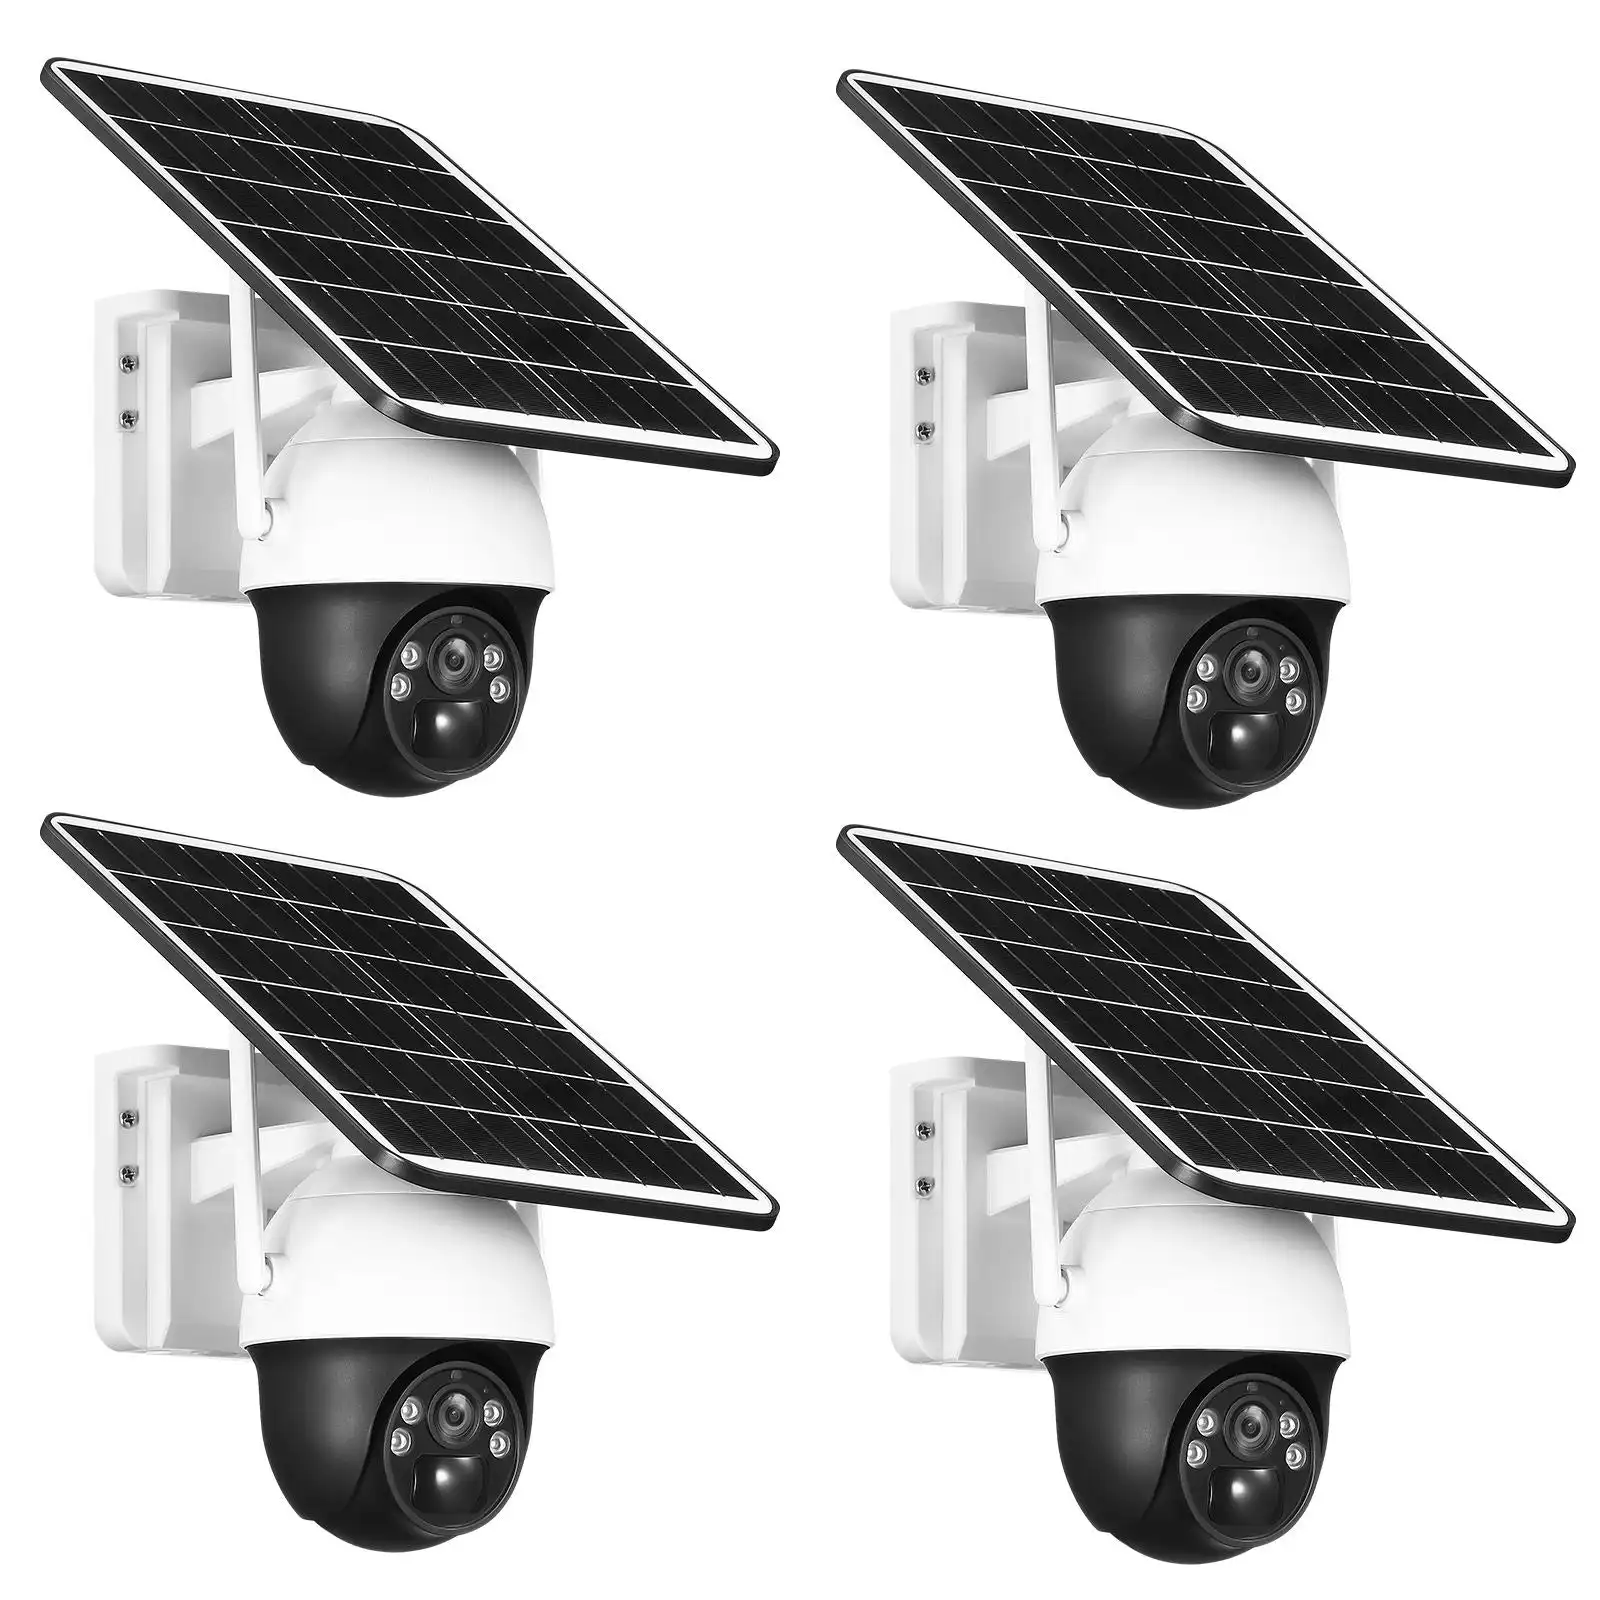 Ausway 4G Solar Security Camera Wireless Outdoor CCTV Home Surveillance System with Battery Remote Control x4